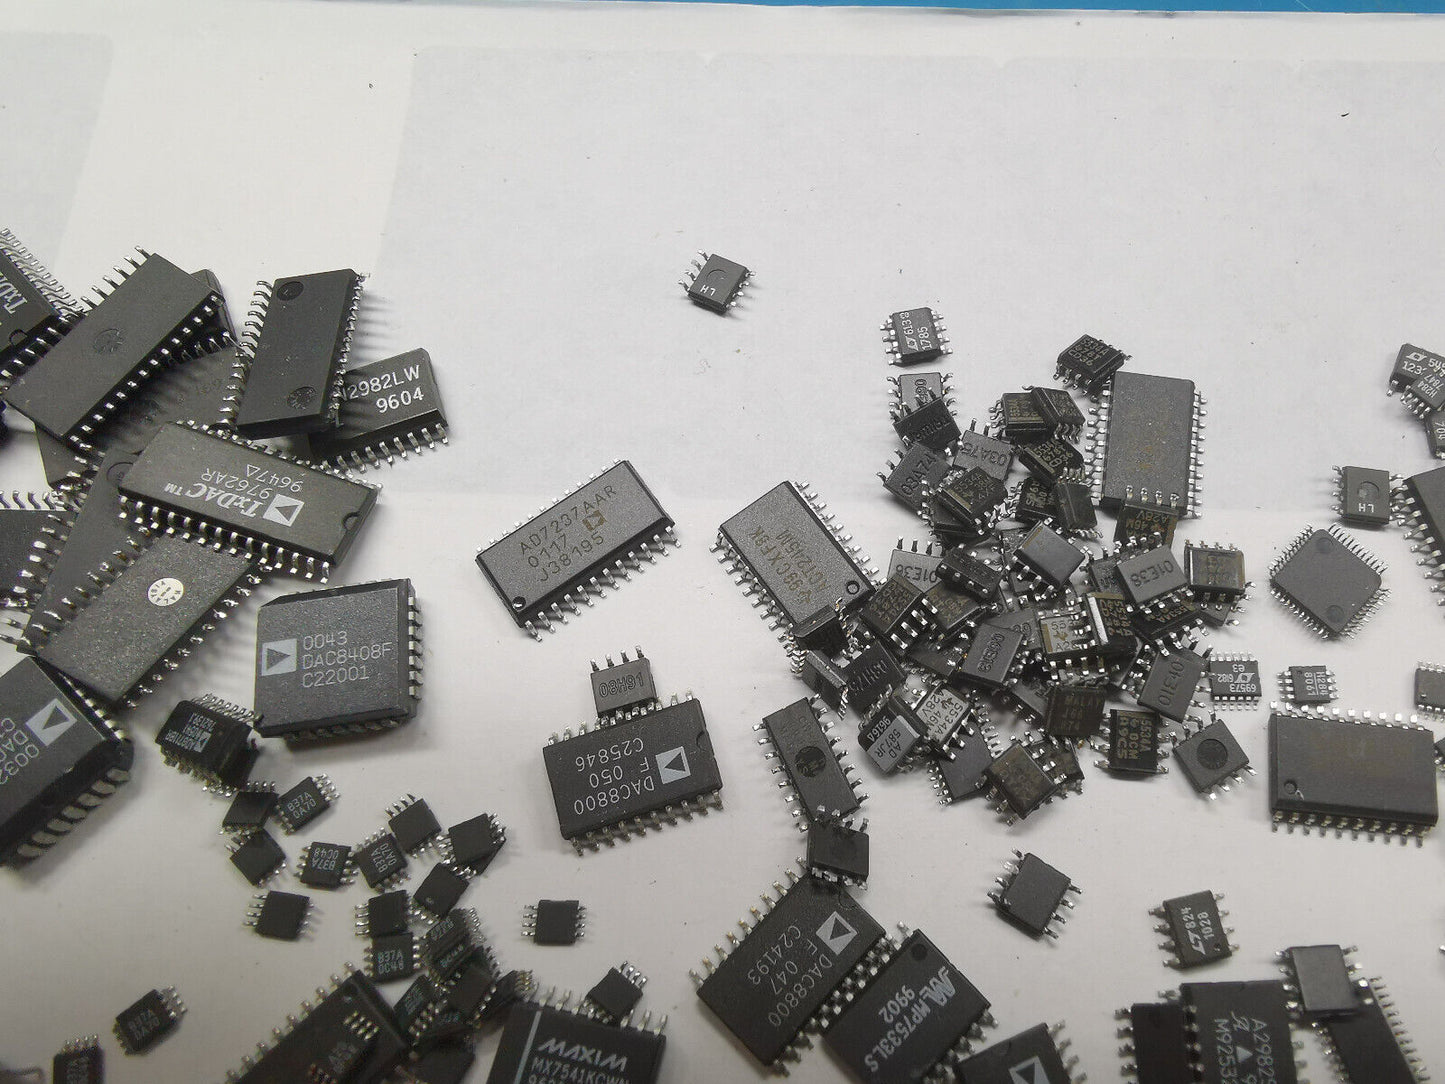 Large Joblot Of DAC ADC Op Amps And Other Parts